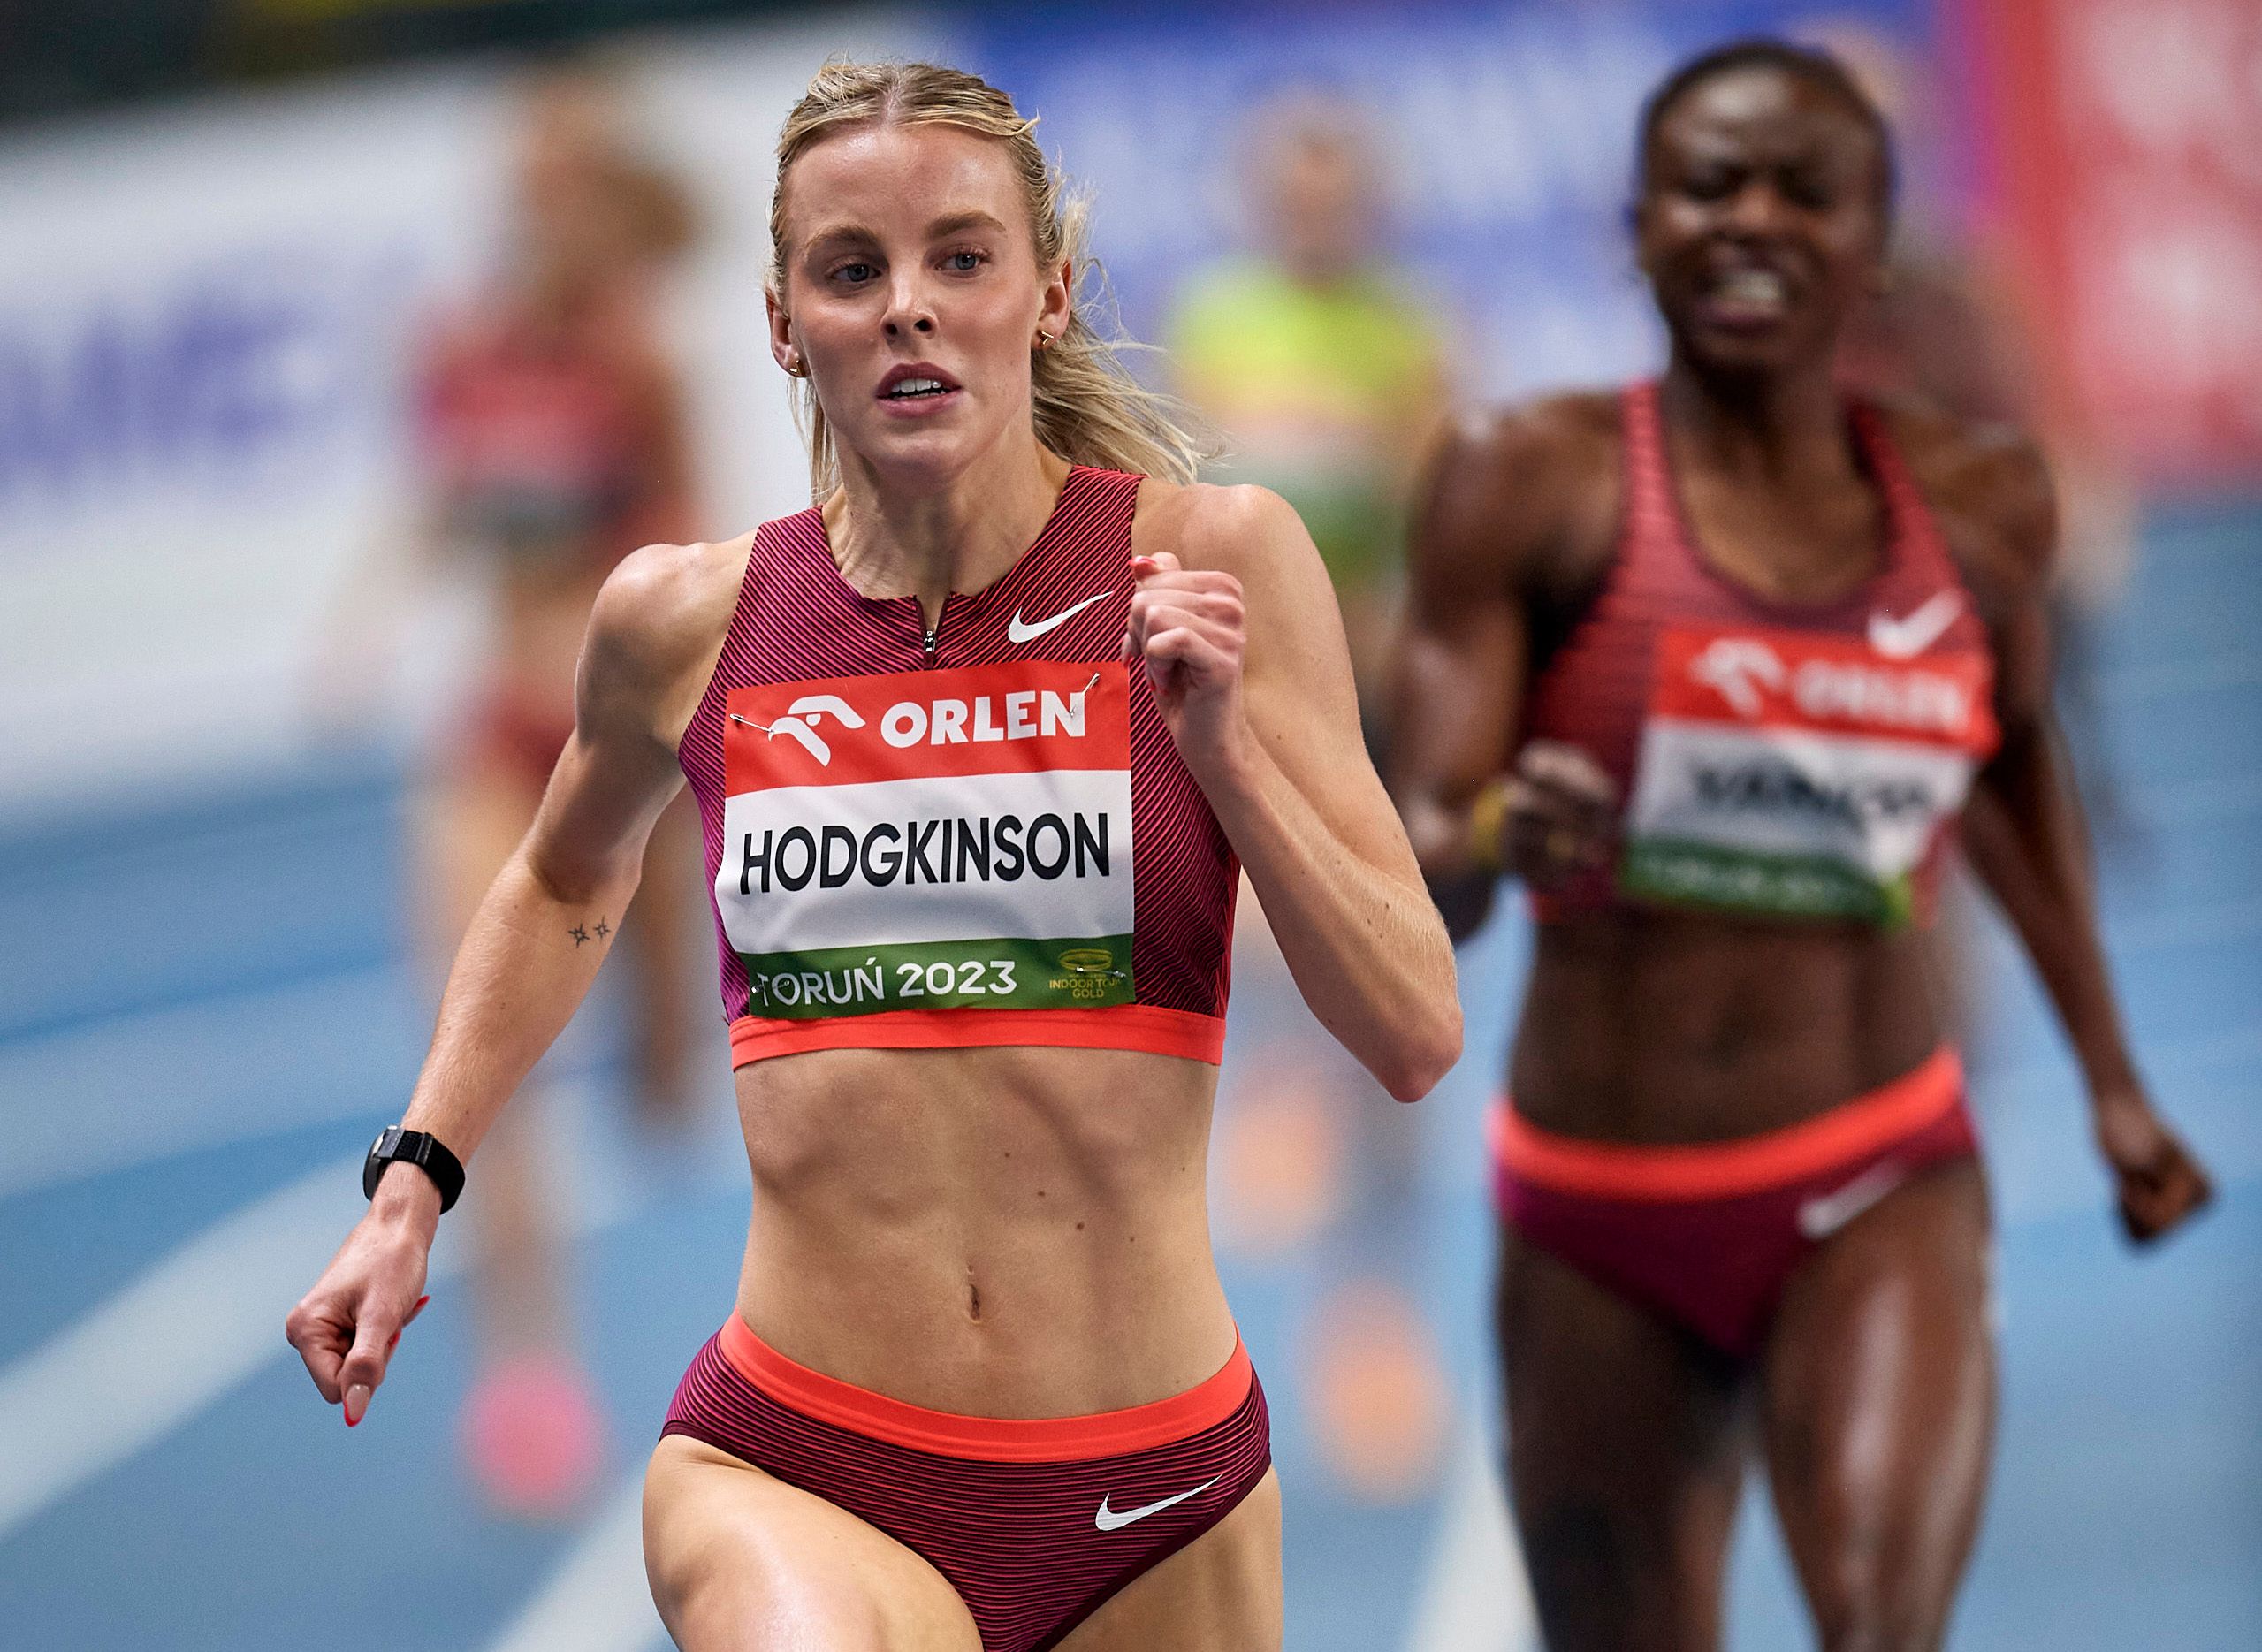 Keely Hodgkinson wins the 800m ahead of Noelie Yarigo at the World Indoor Tour Gold meeting in Torun